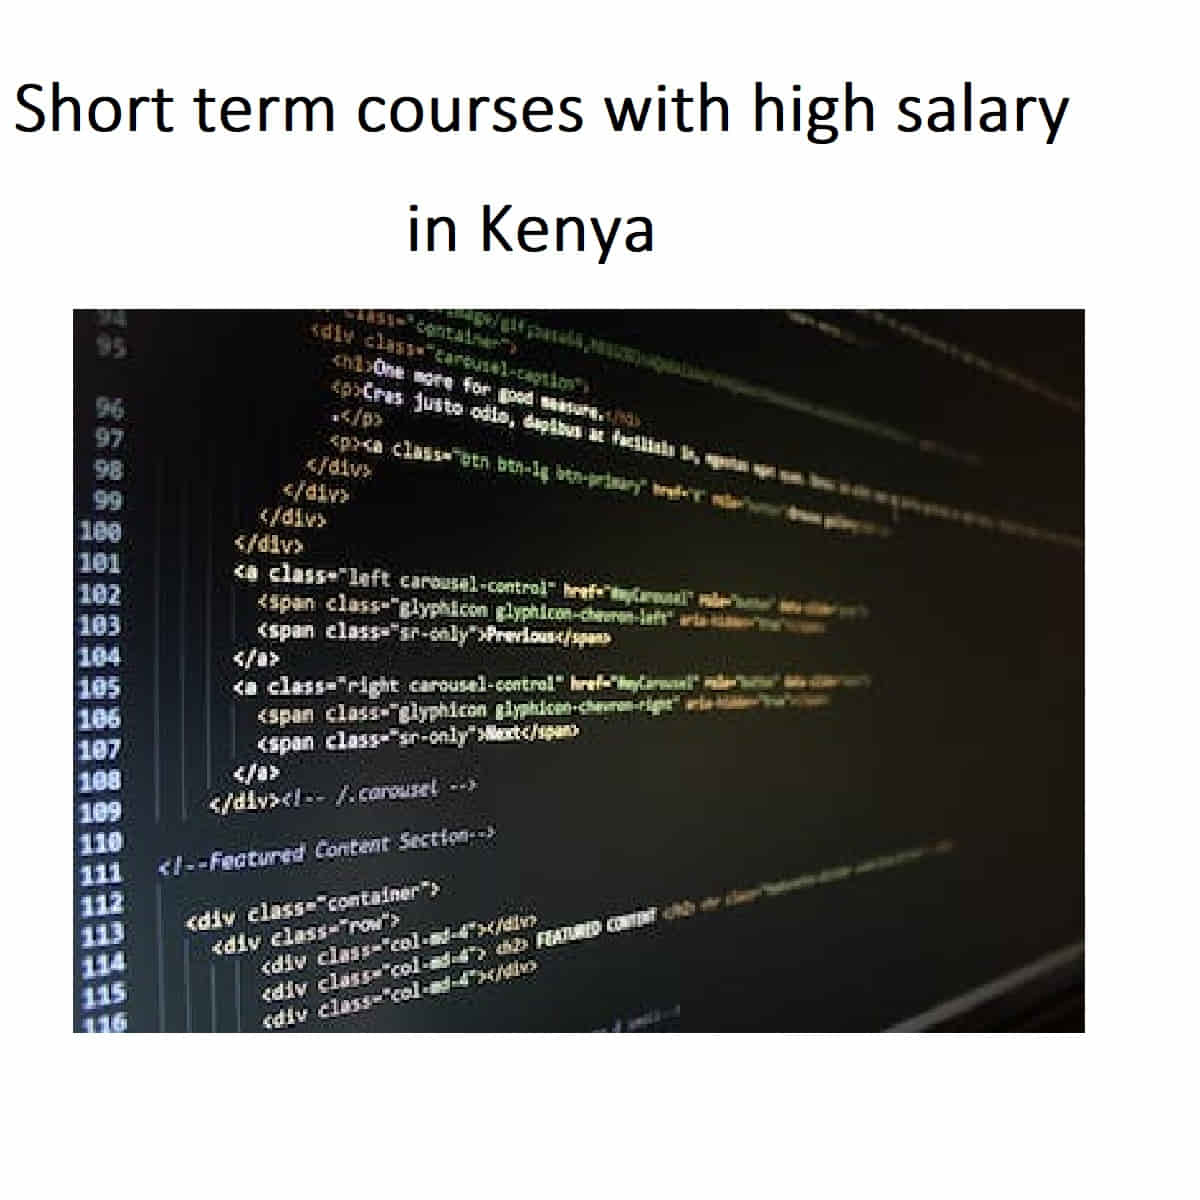 Short term courses with high salary in Kenya